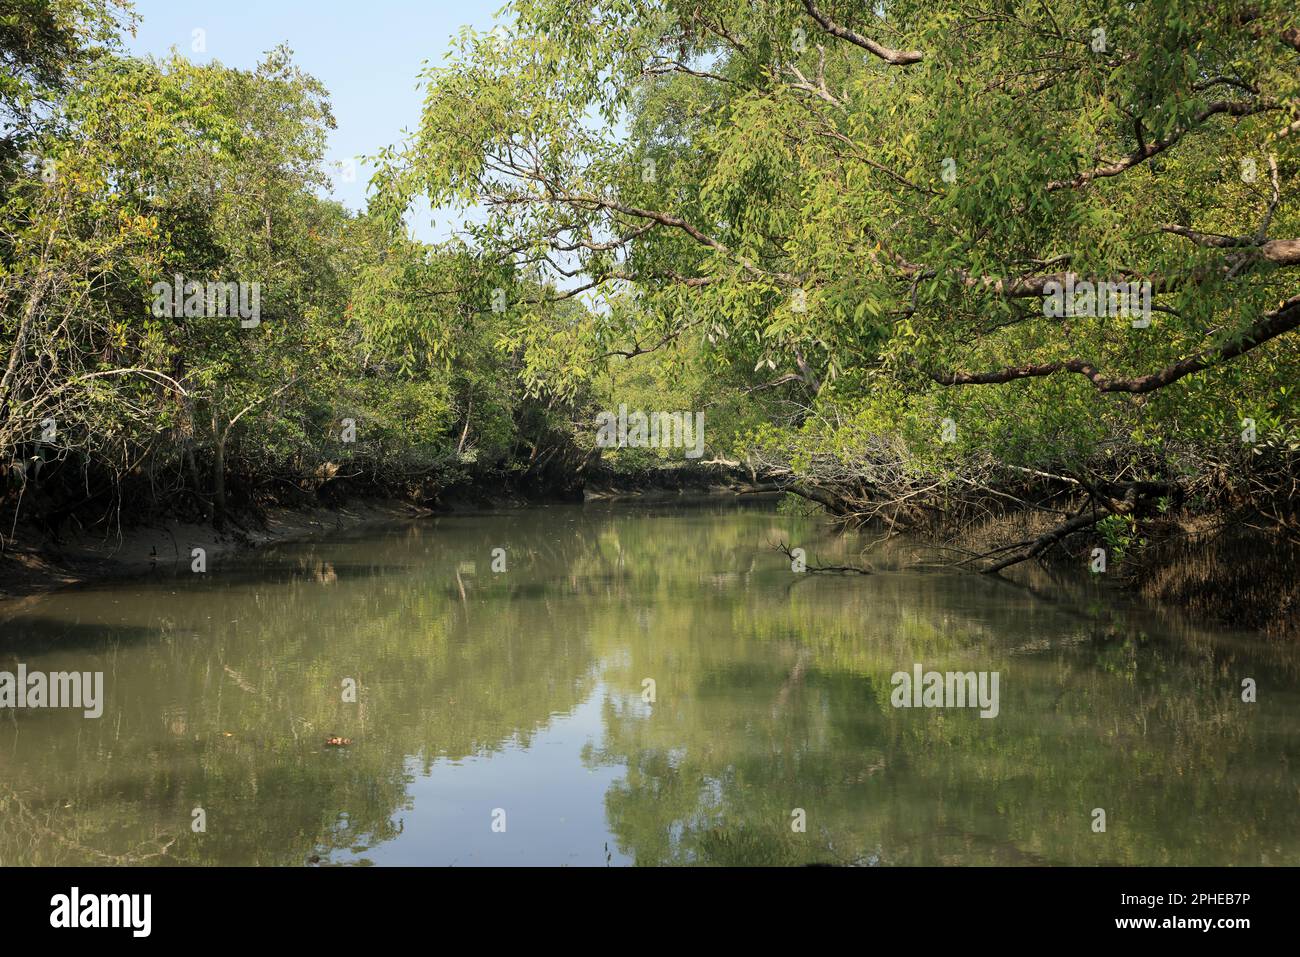 A canal in Sundarbans.Sundarbans is the biggest natural mangrove forest in the world. Stock Photo